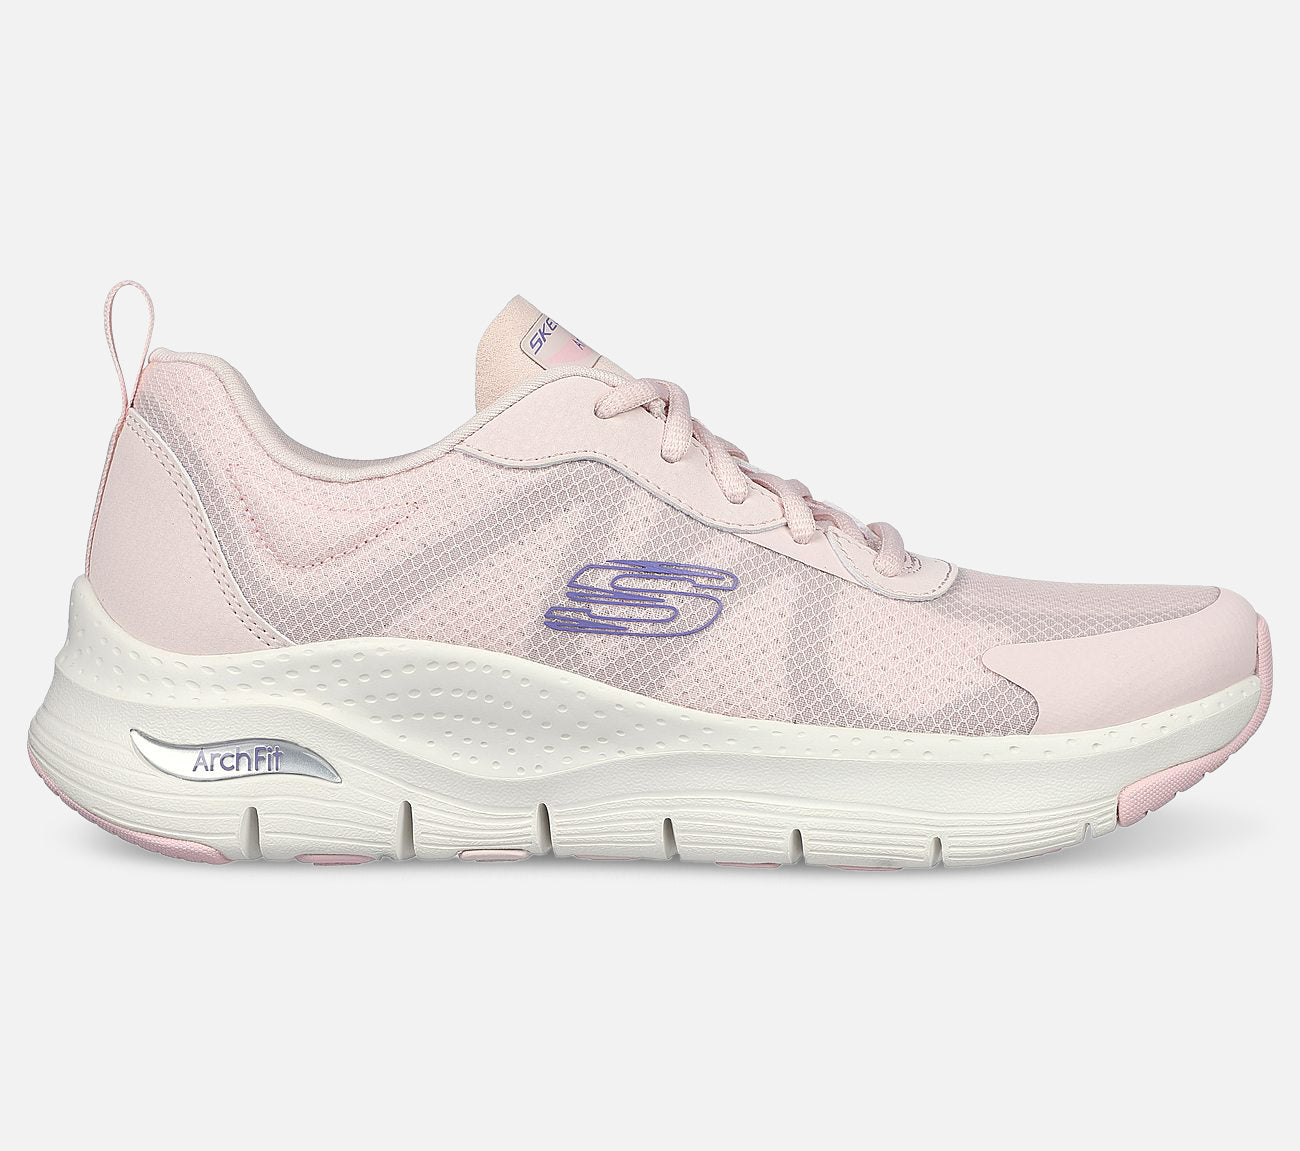 Arch Fit - Wave Rush Shoe Skechers